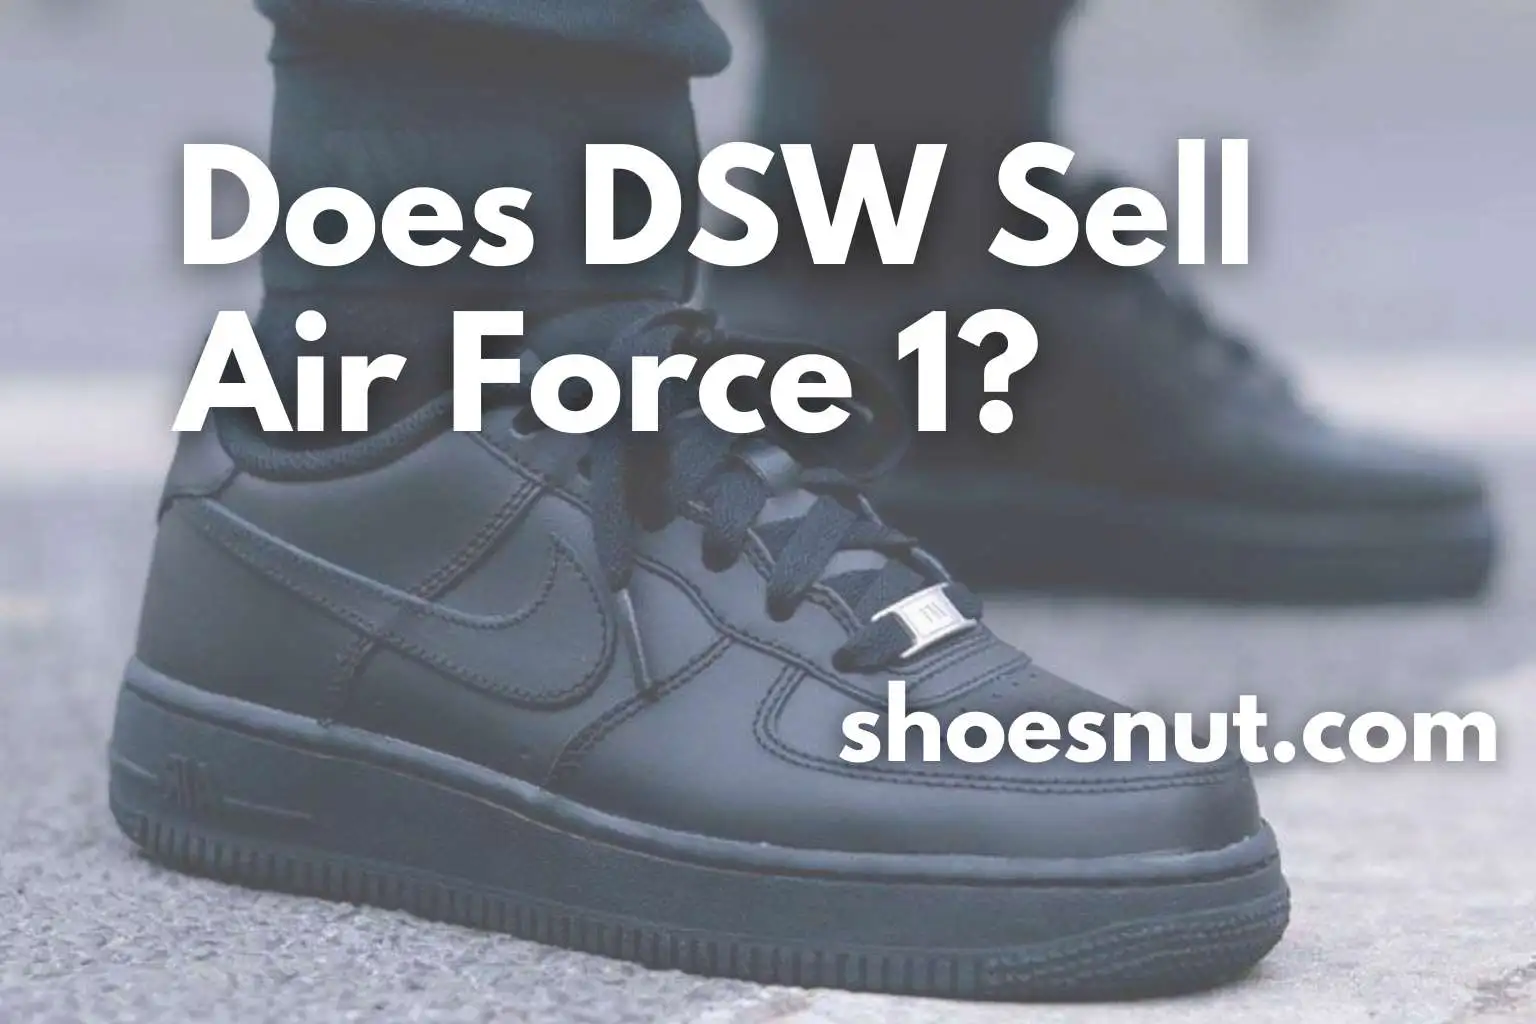 Does DSW Sell Air Force 1?